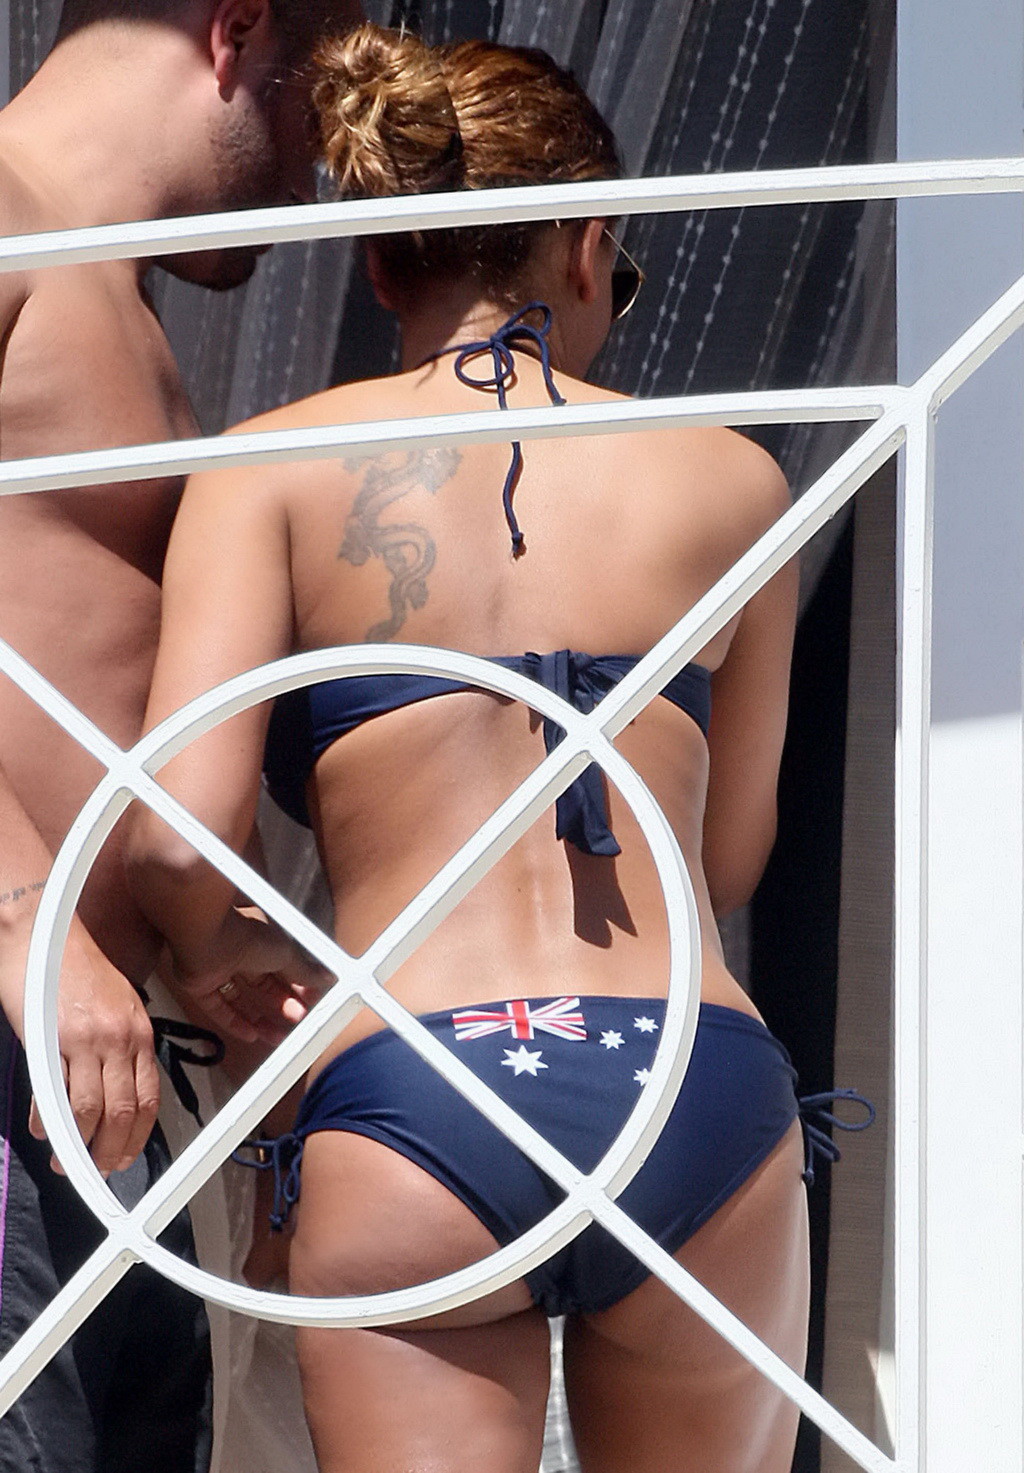 Melanie Brown in bikini caught by paparazzi while tanning on balcony in LA #75258357